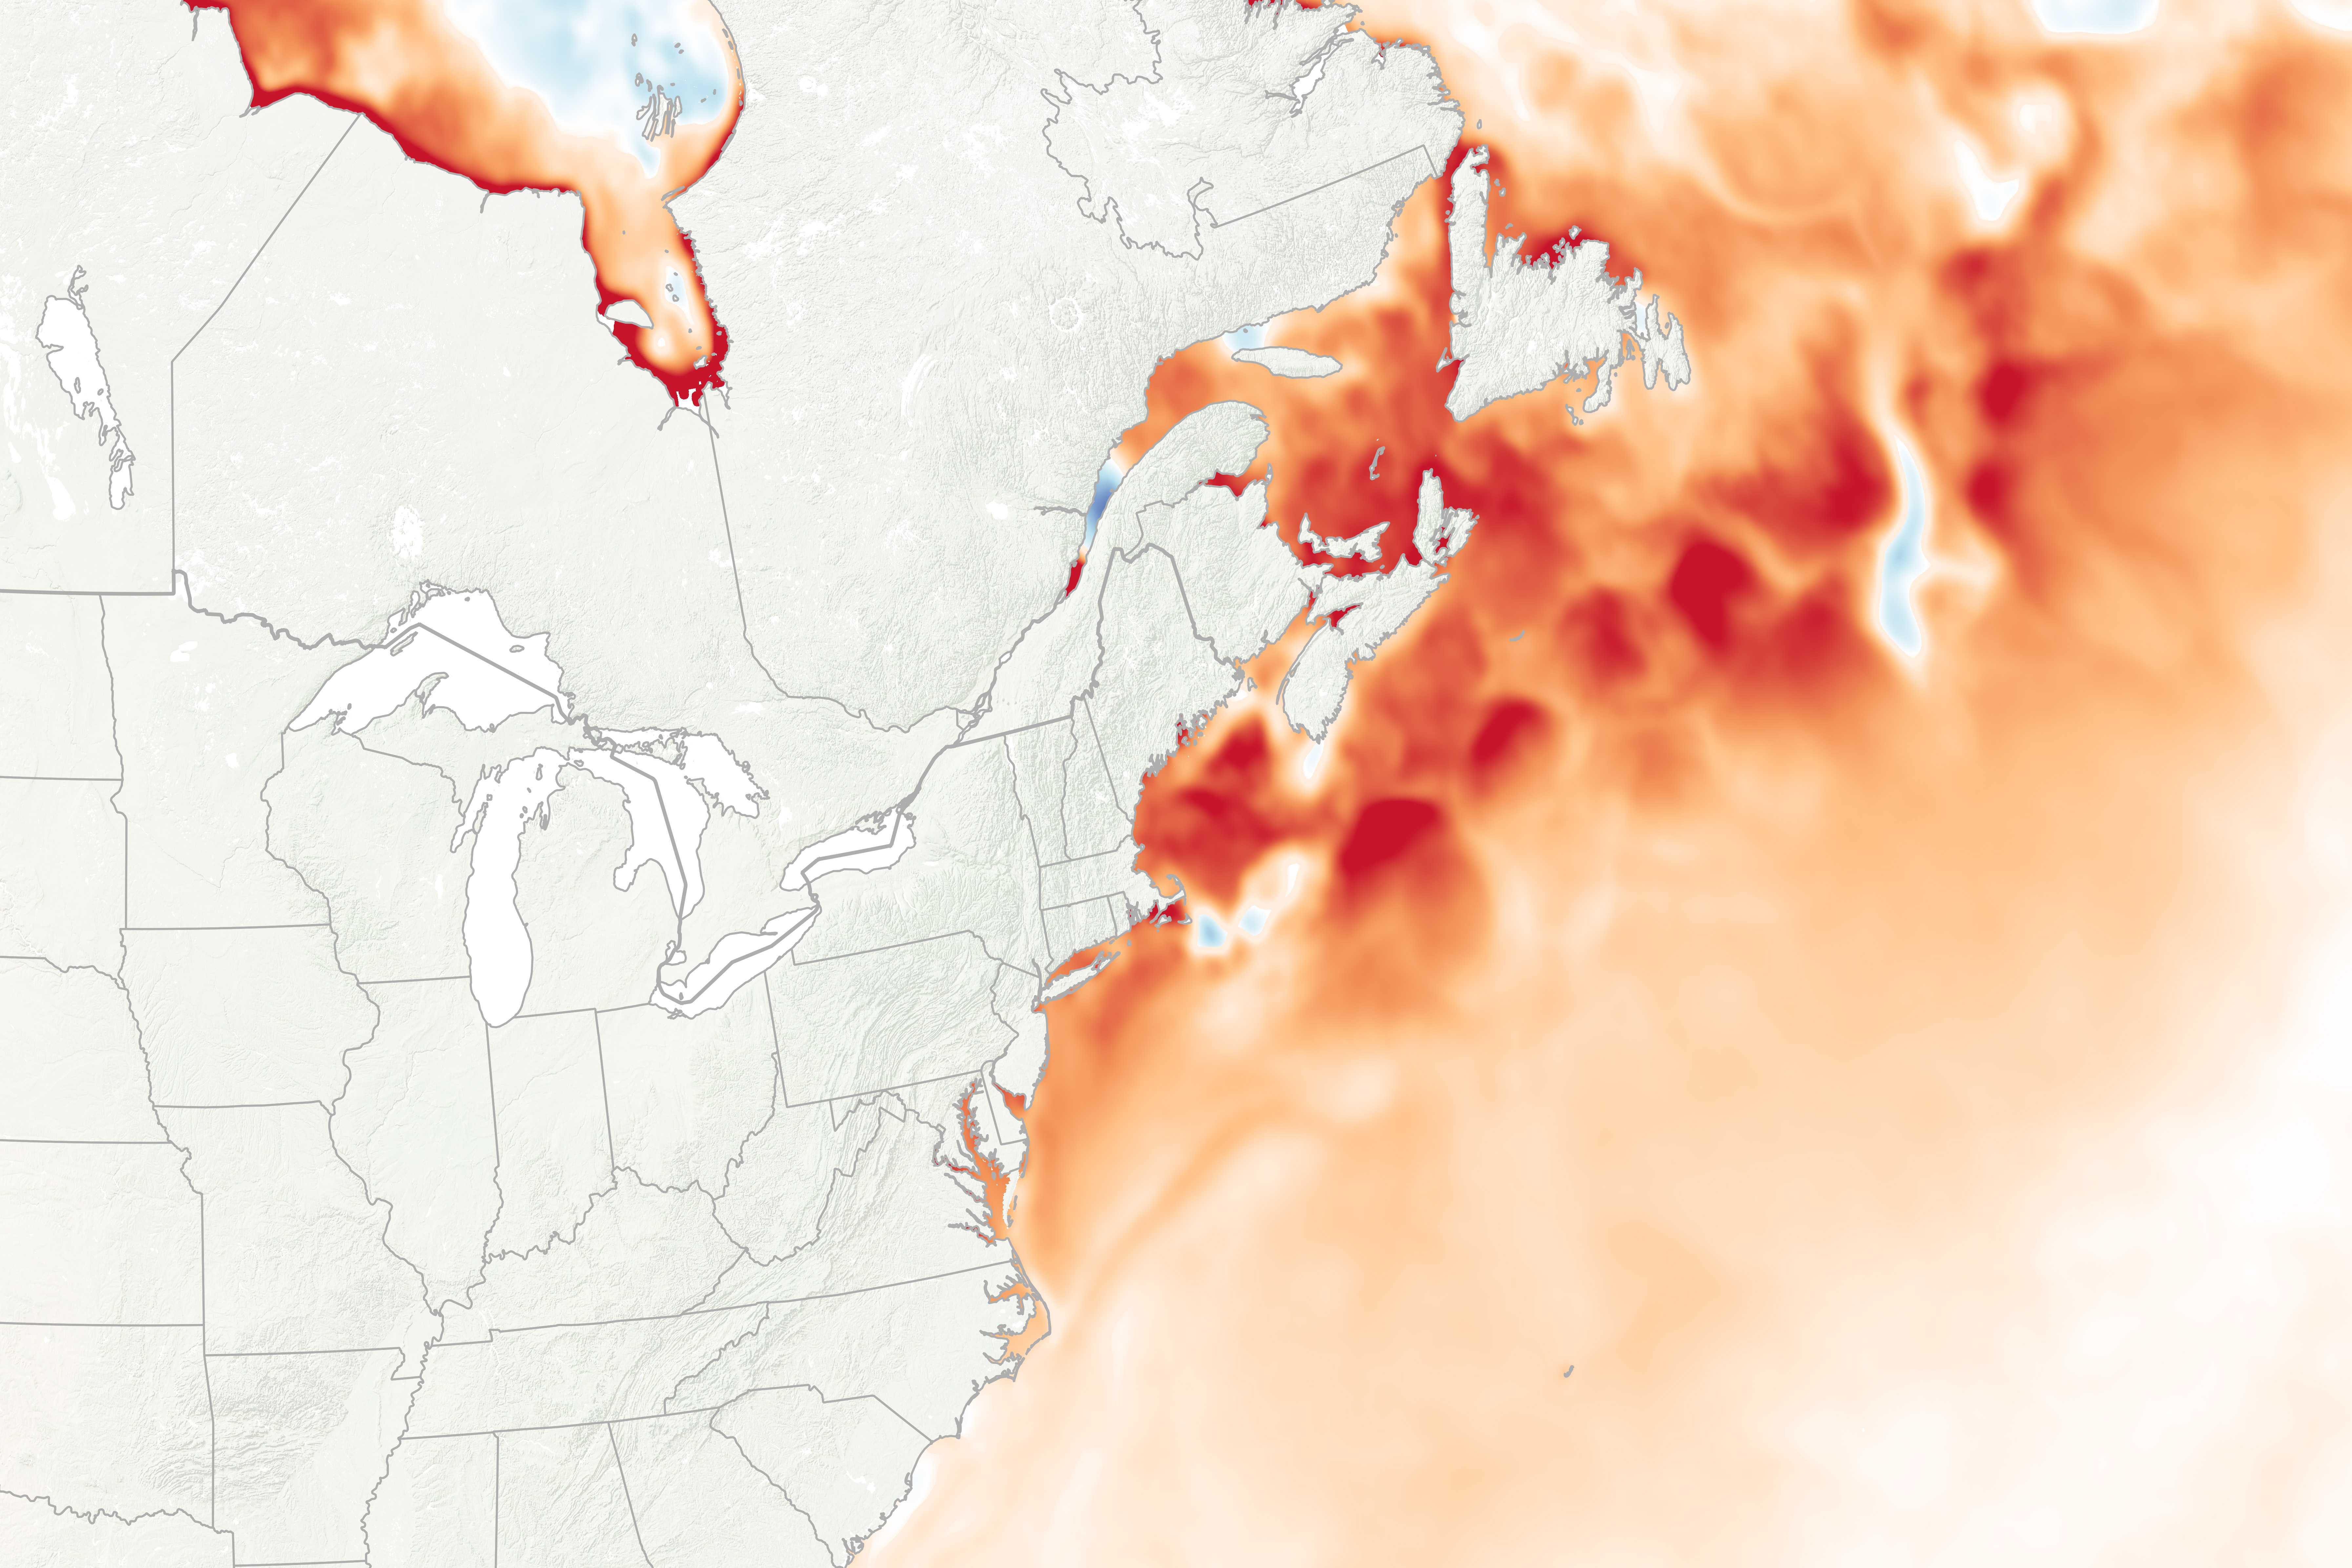 Watery Heatwave Cooks the Gulf of Maine - related image preview